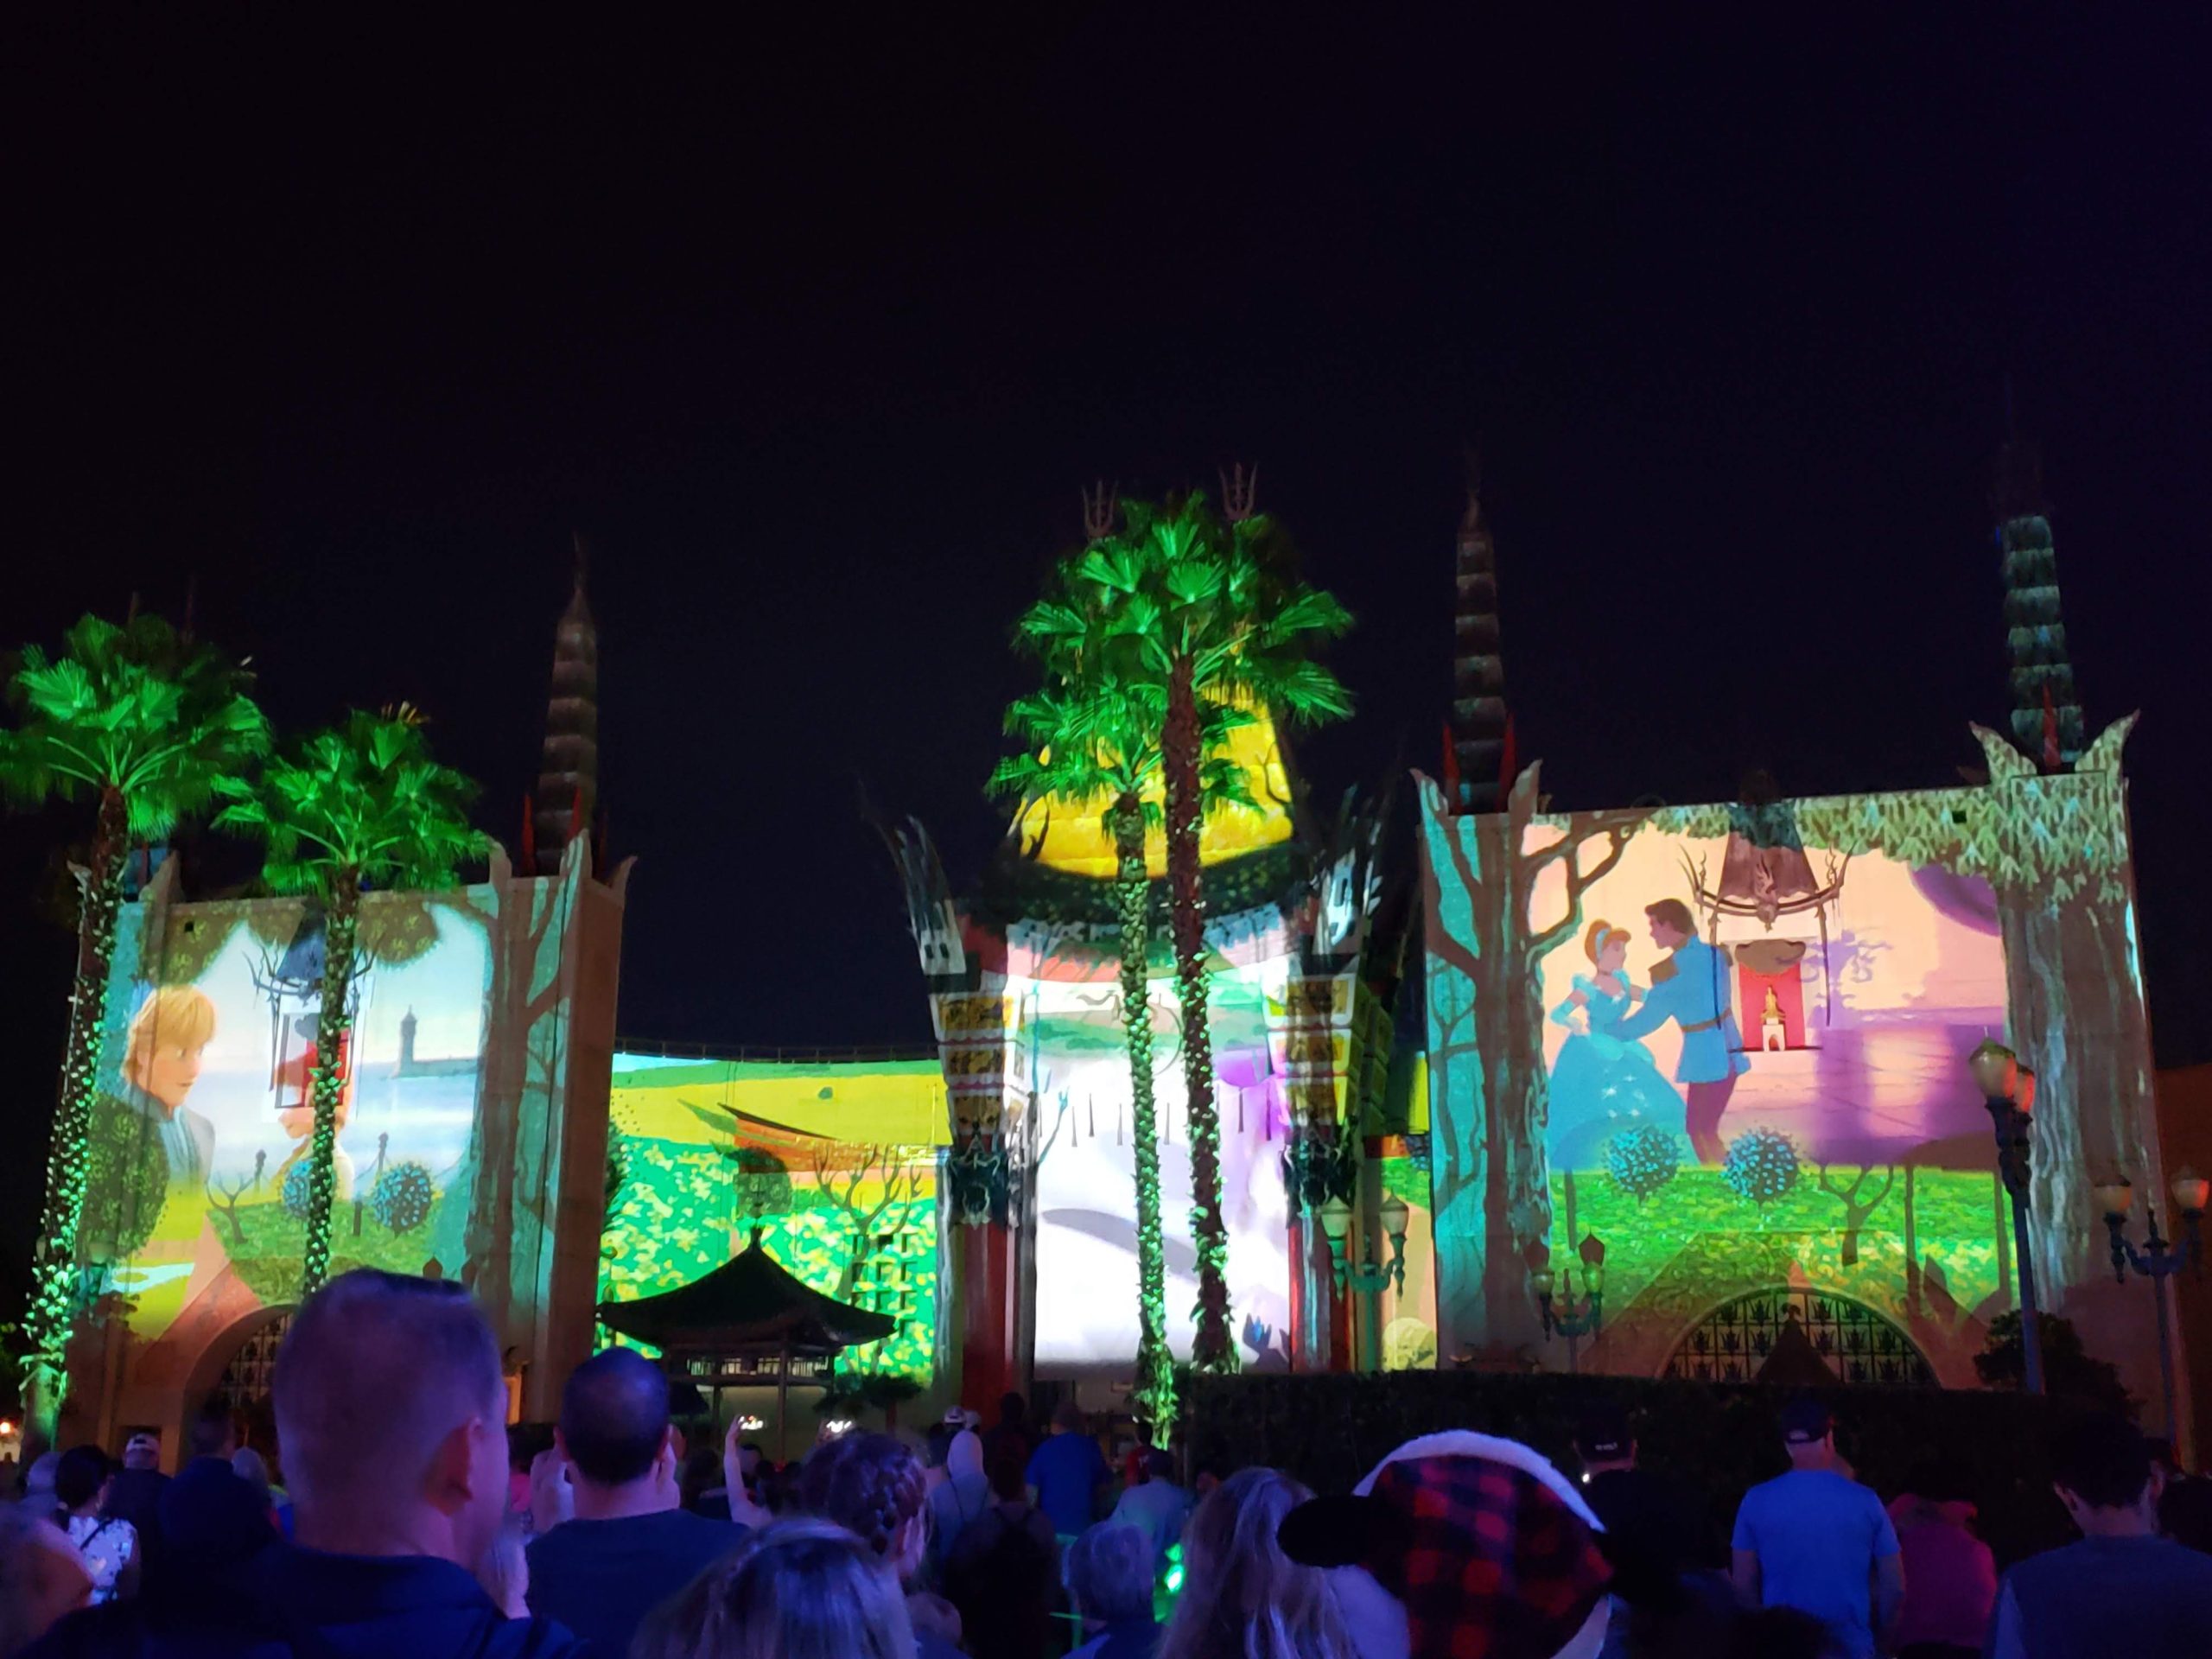 Jingle Bell Jingle Bam images of Disney Princesses projected onto the Chinese Theater in Hollywood Studios, palm trees lit up 